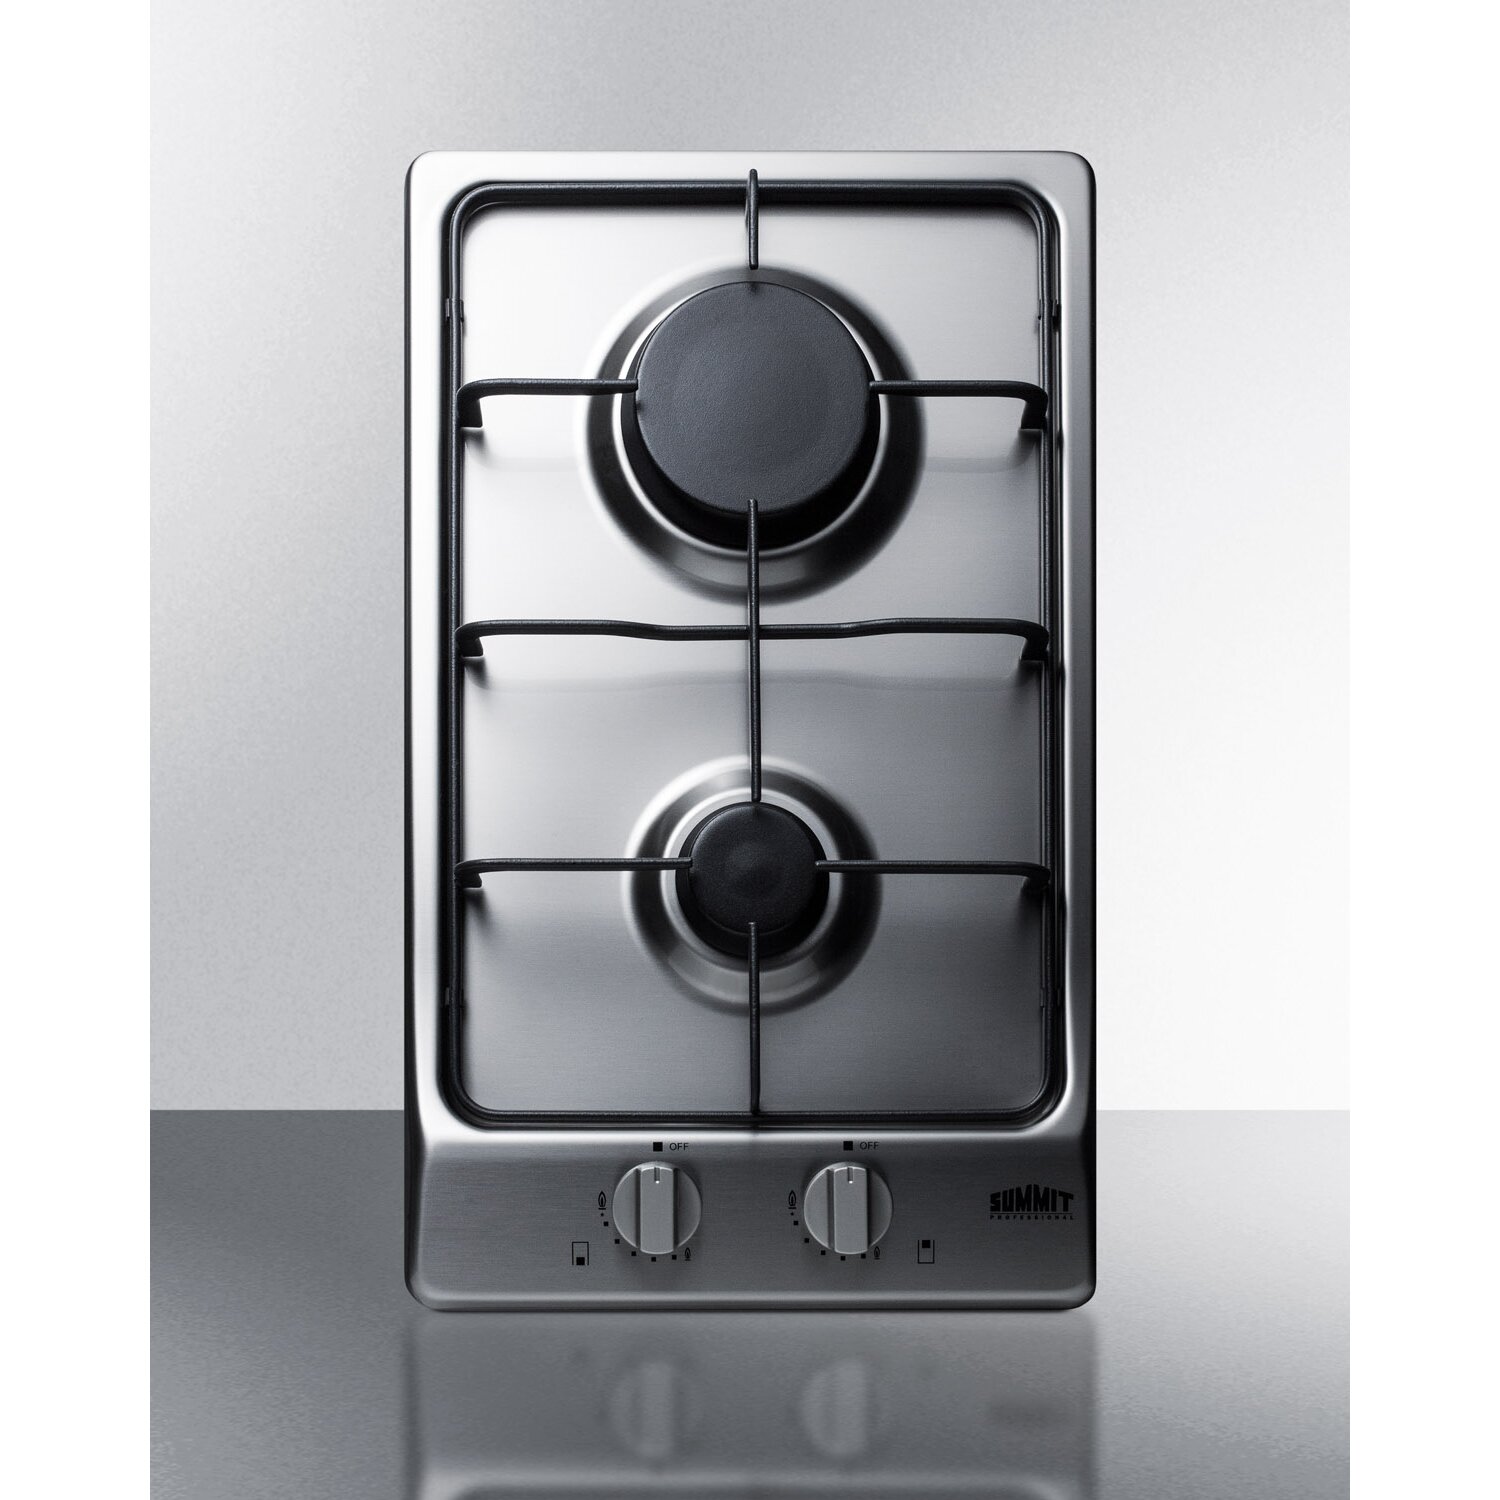 Gas Cooktop Review